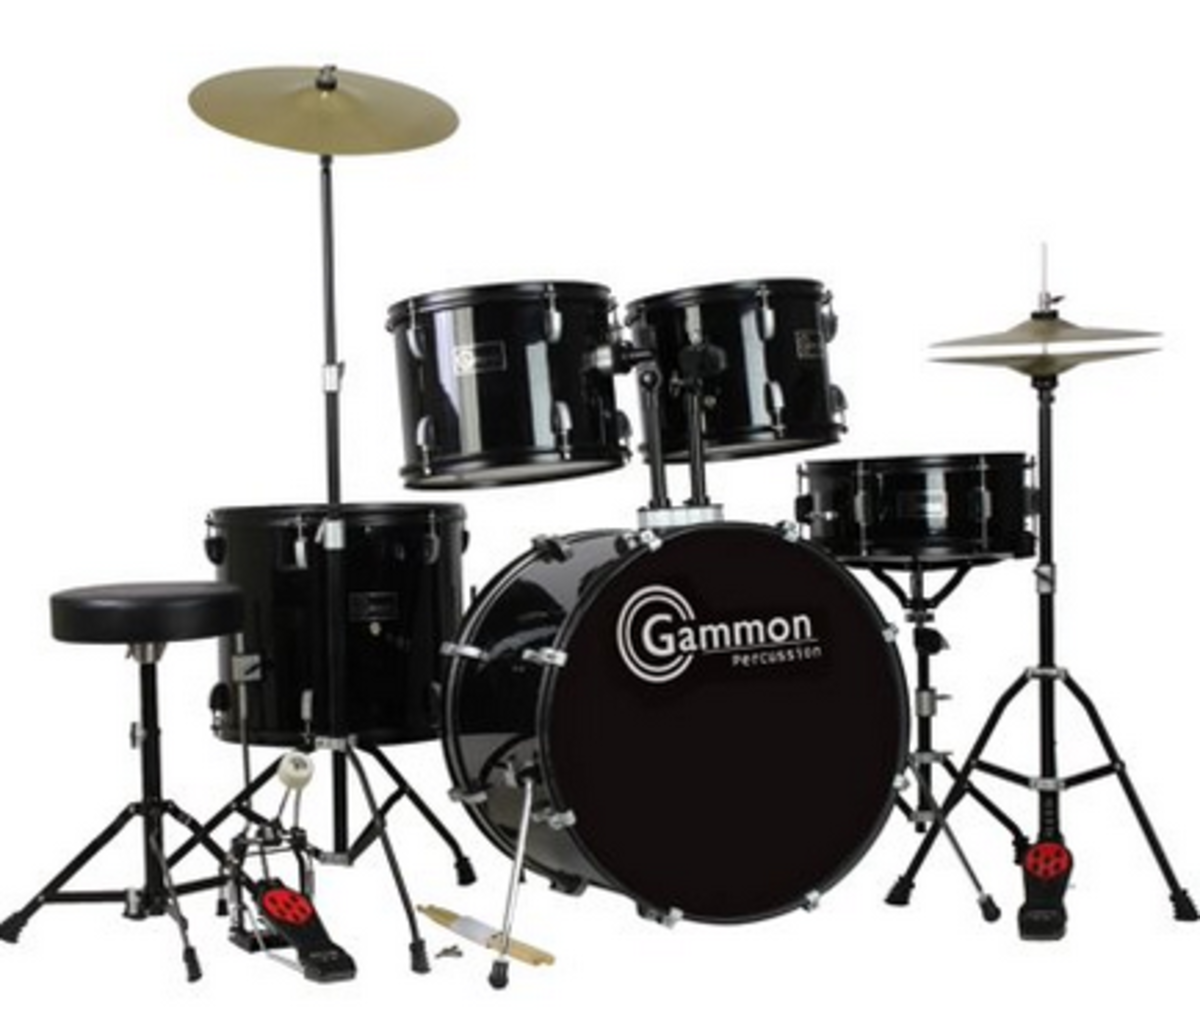 Gammon drum kits are a great low-cost option for beginners and child drummers.